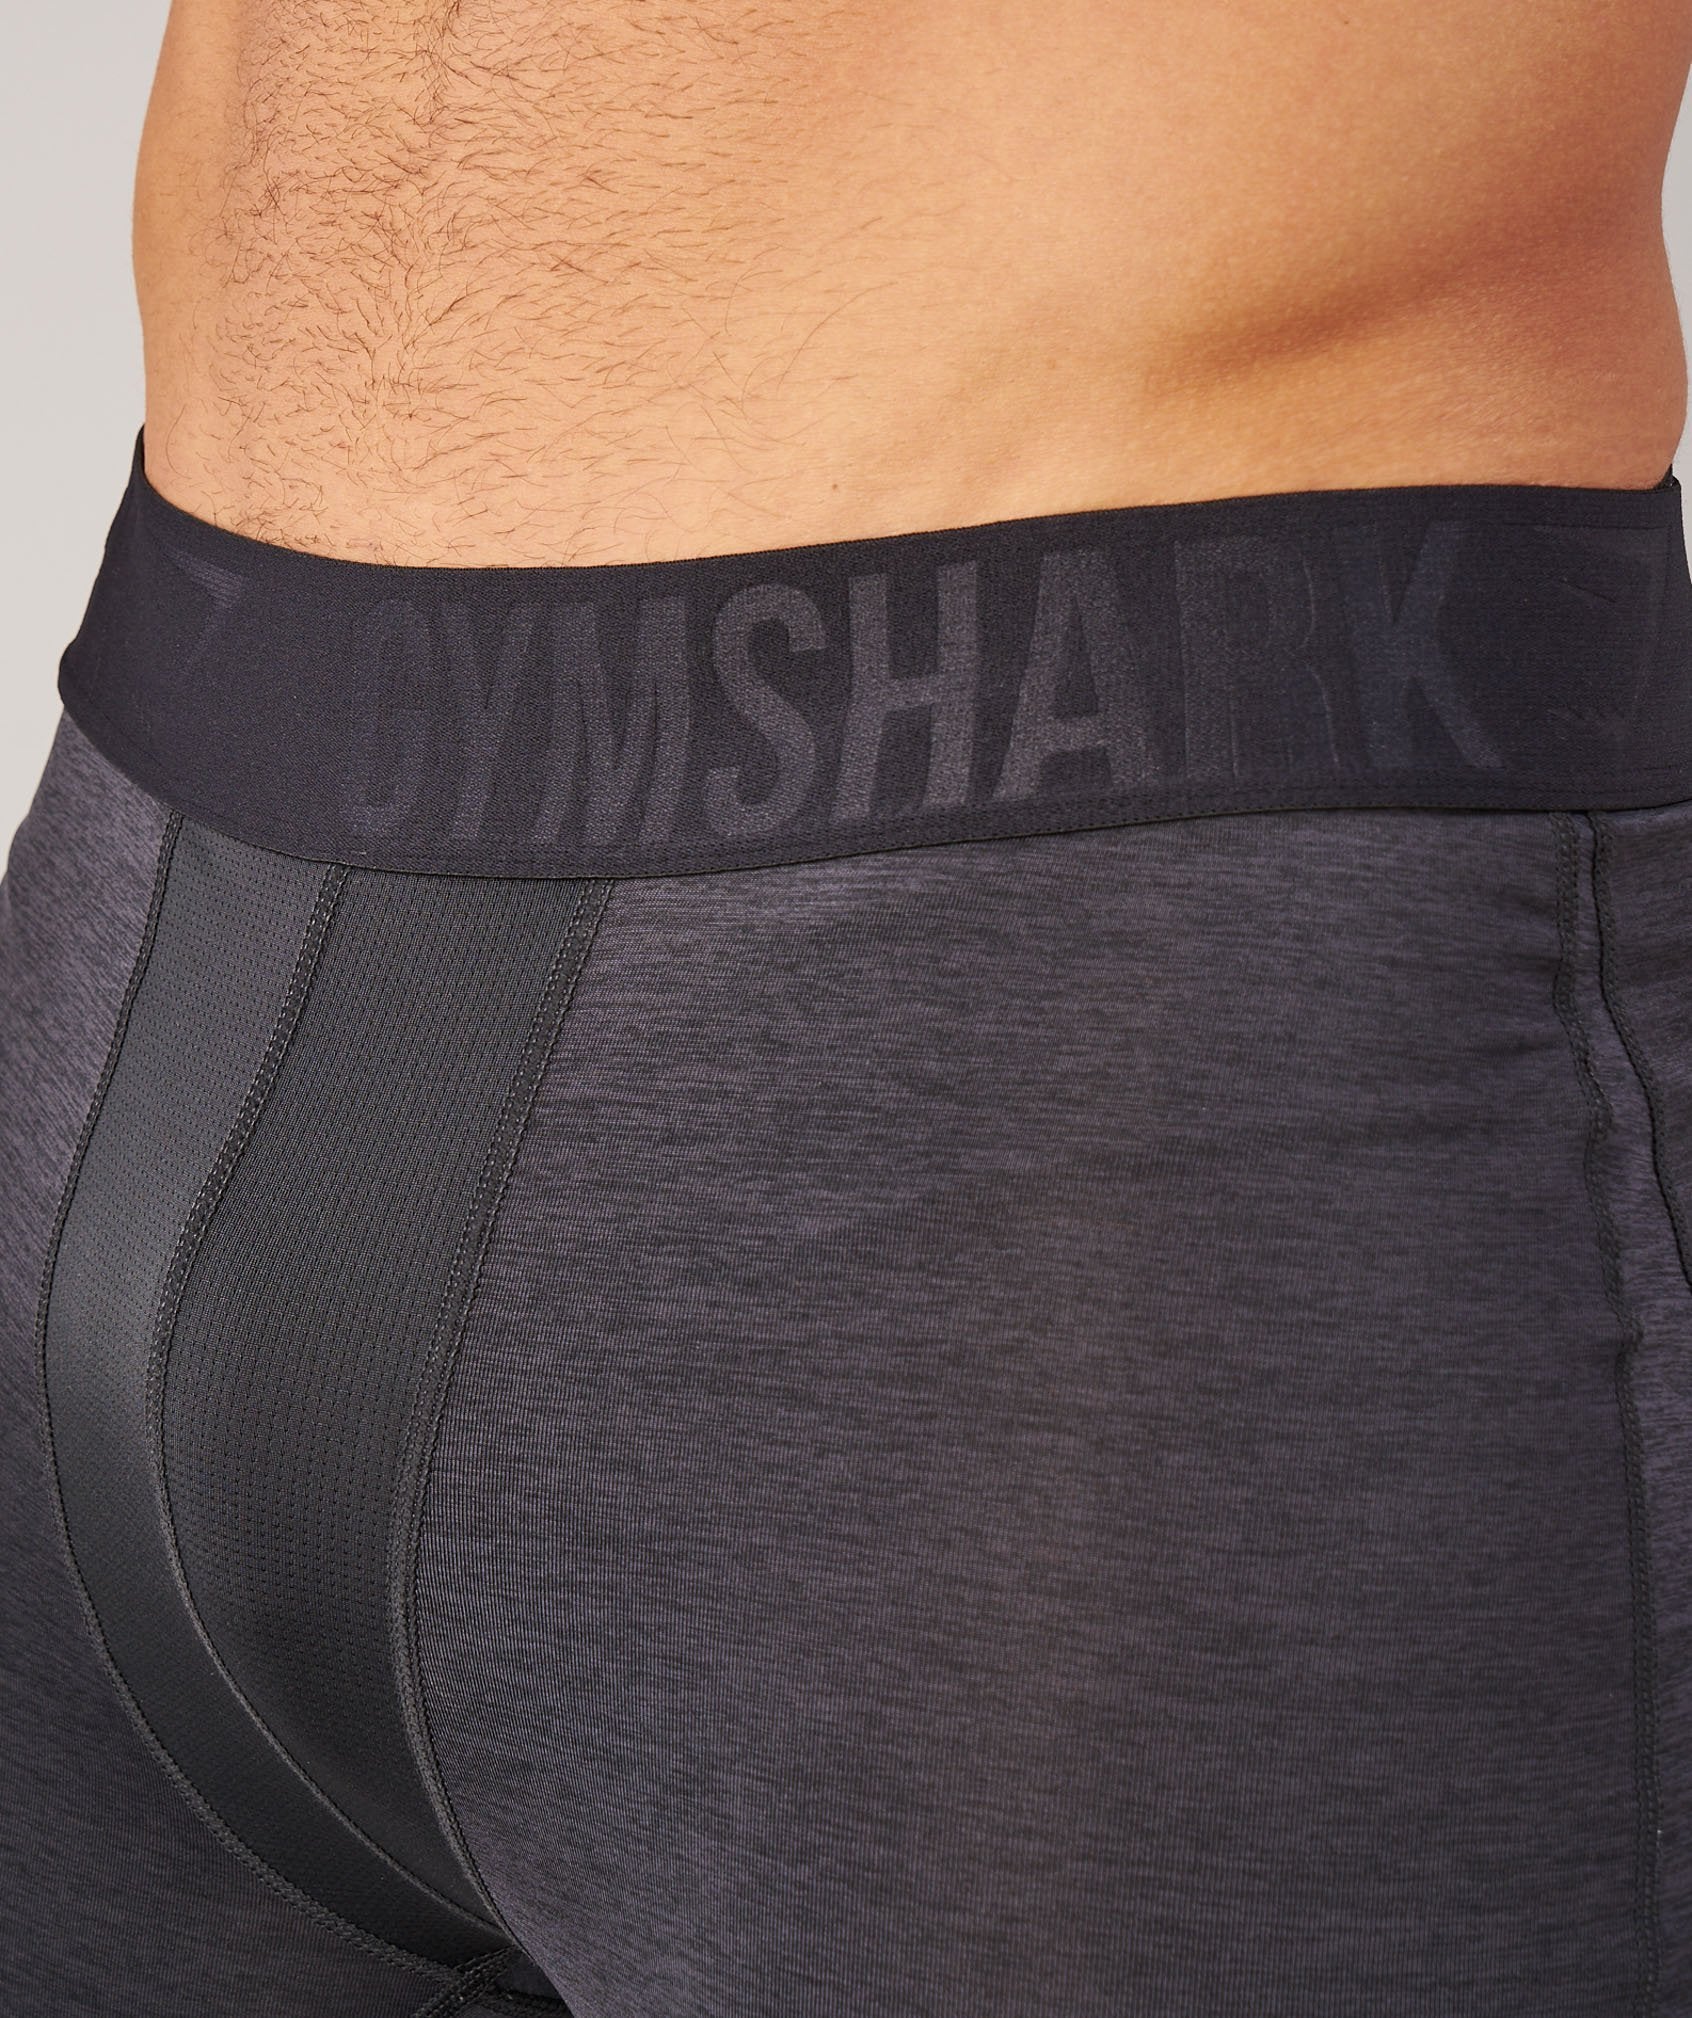 Element Baselayer Shorts in Black Marl - view 5